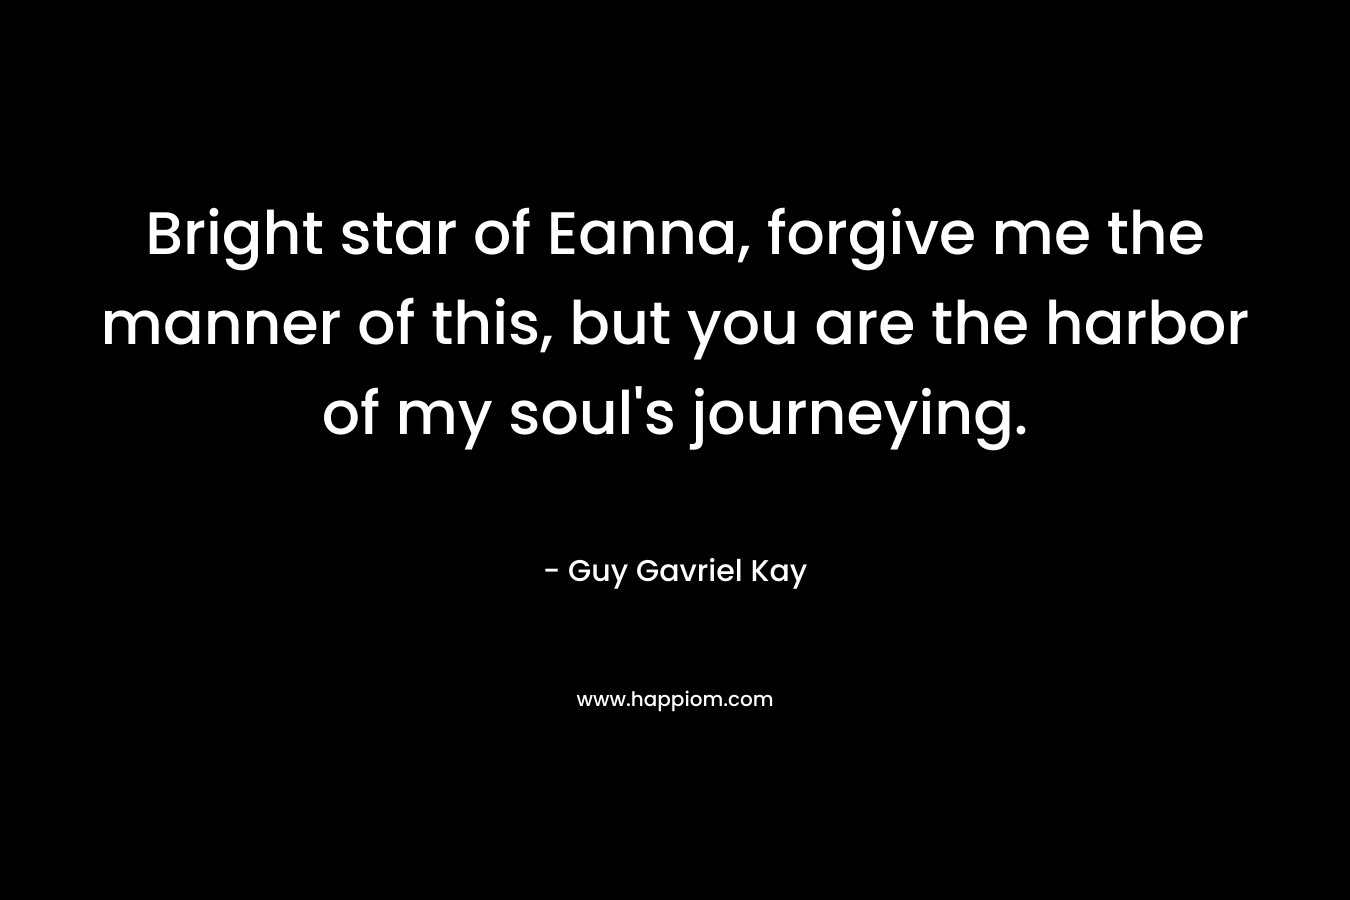 Bright star of Eanna, forgive me the manner of this, but you are the harbor of my soul’s journeying. – Guy Gavriel Kay